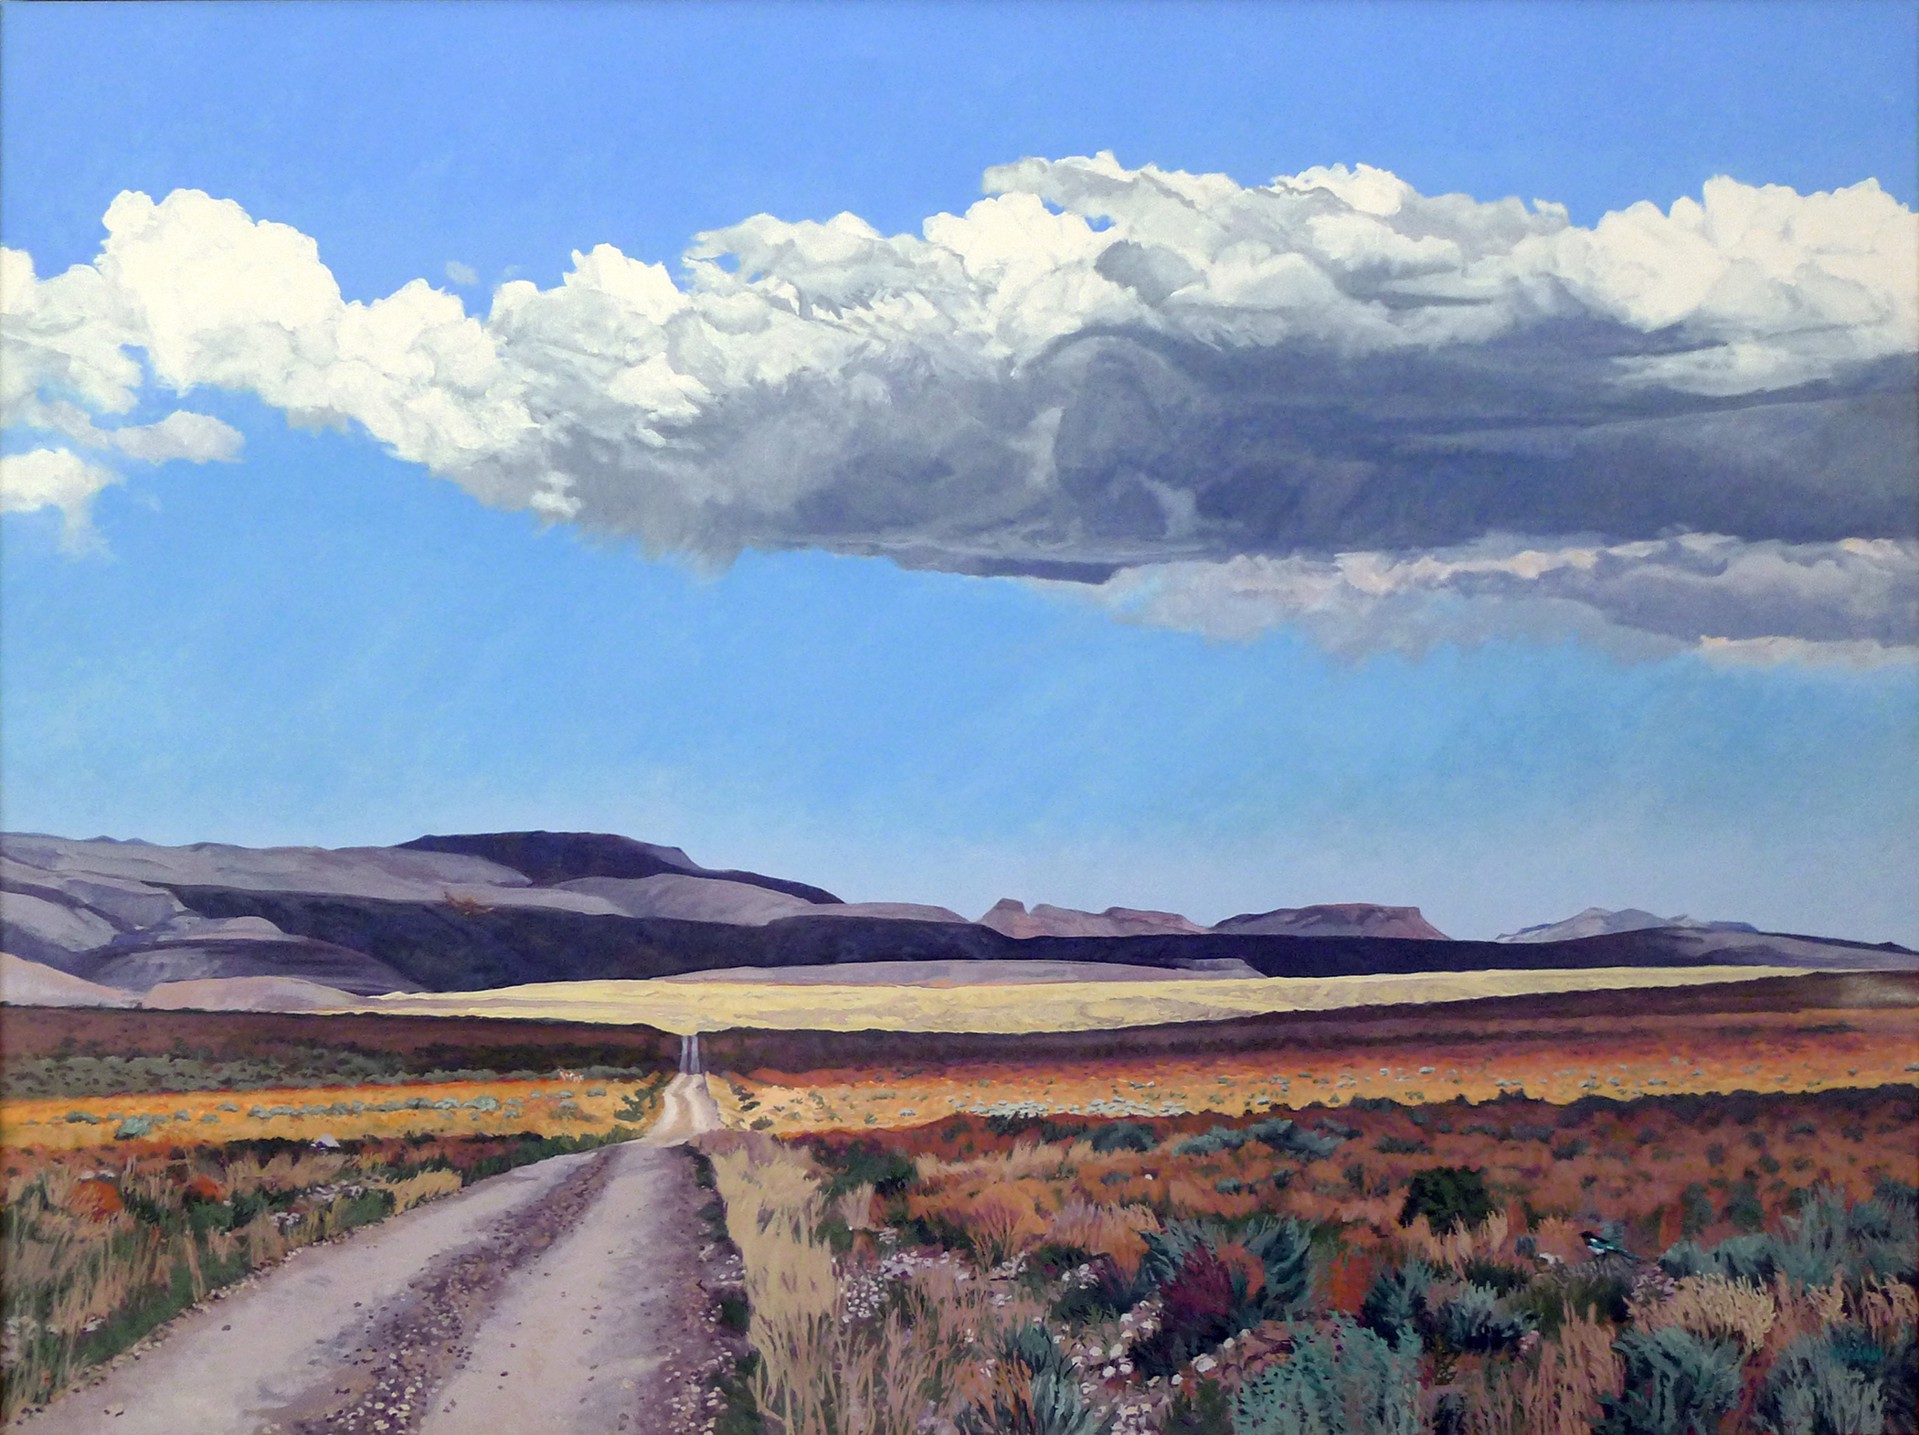 Edge of the Great Basin by Sheila Gardner